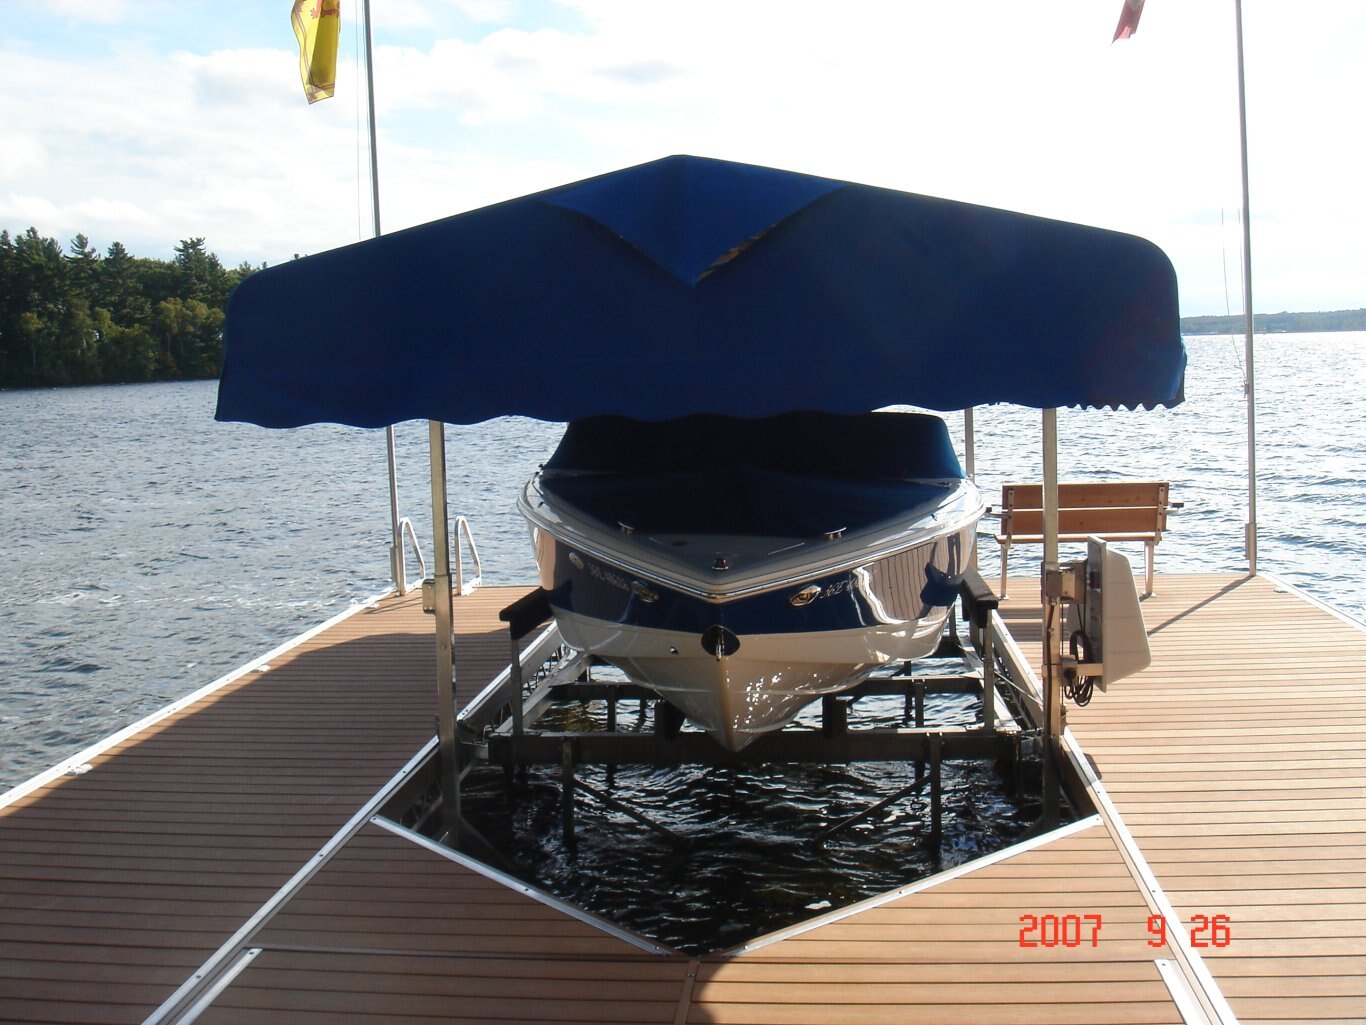 R & J Machine Cantilever Boat Lifts